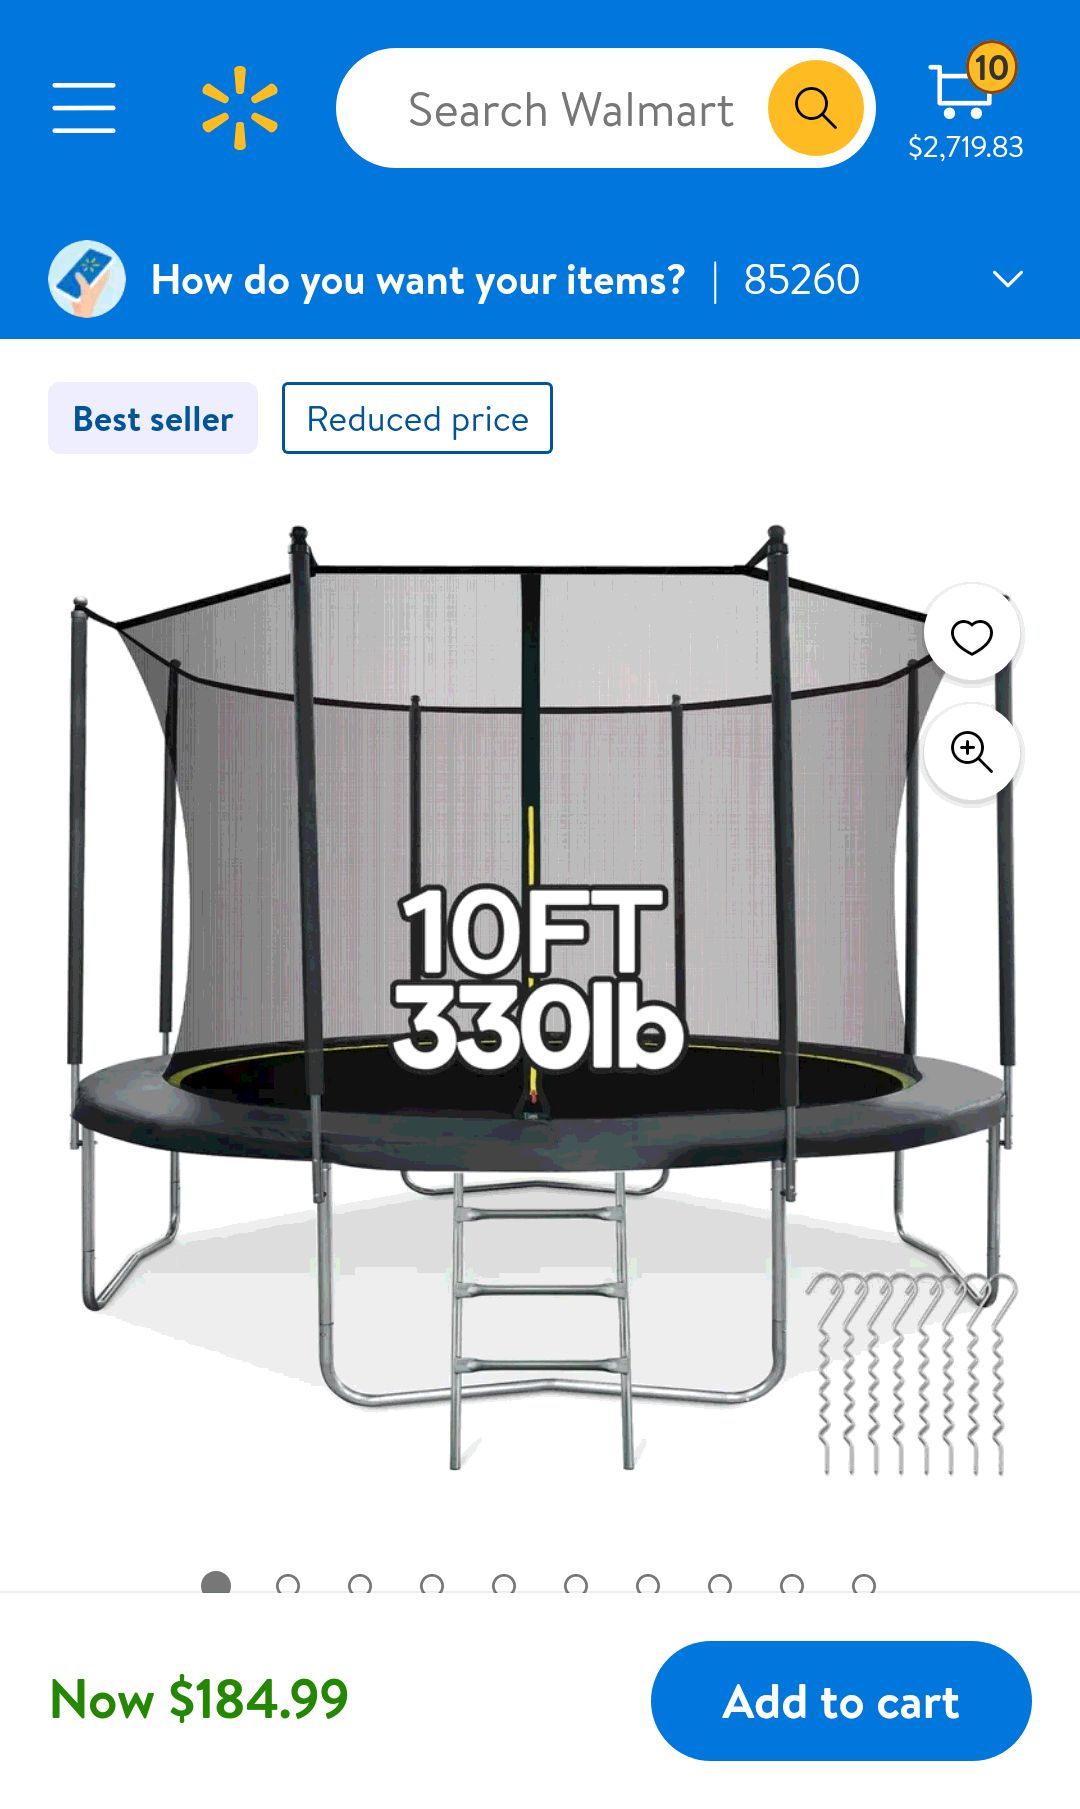 MARNUR 10FT Trampoline for Kids Outdoor Fitness Trampoline with Enclosure Net, Spring Cover, Ladder, Wind Stakes,330lbs Weight Capacity - Walmart.com